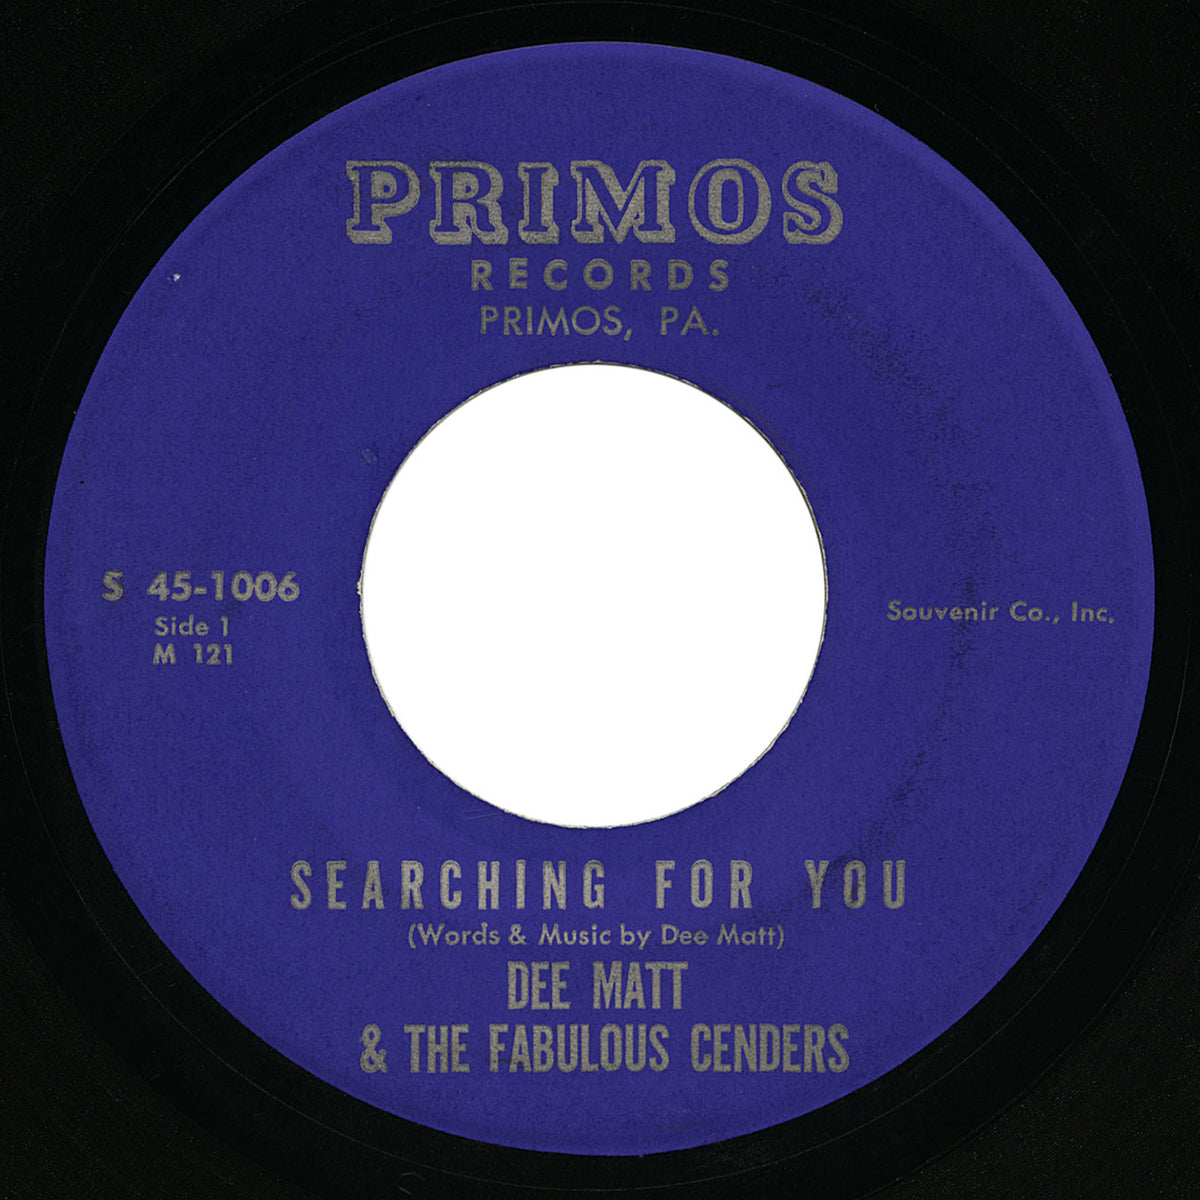 Dee Matt & The Fabulous Cenders – Searching For You – Primos